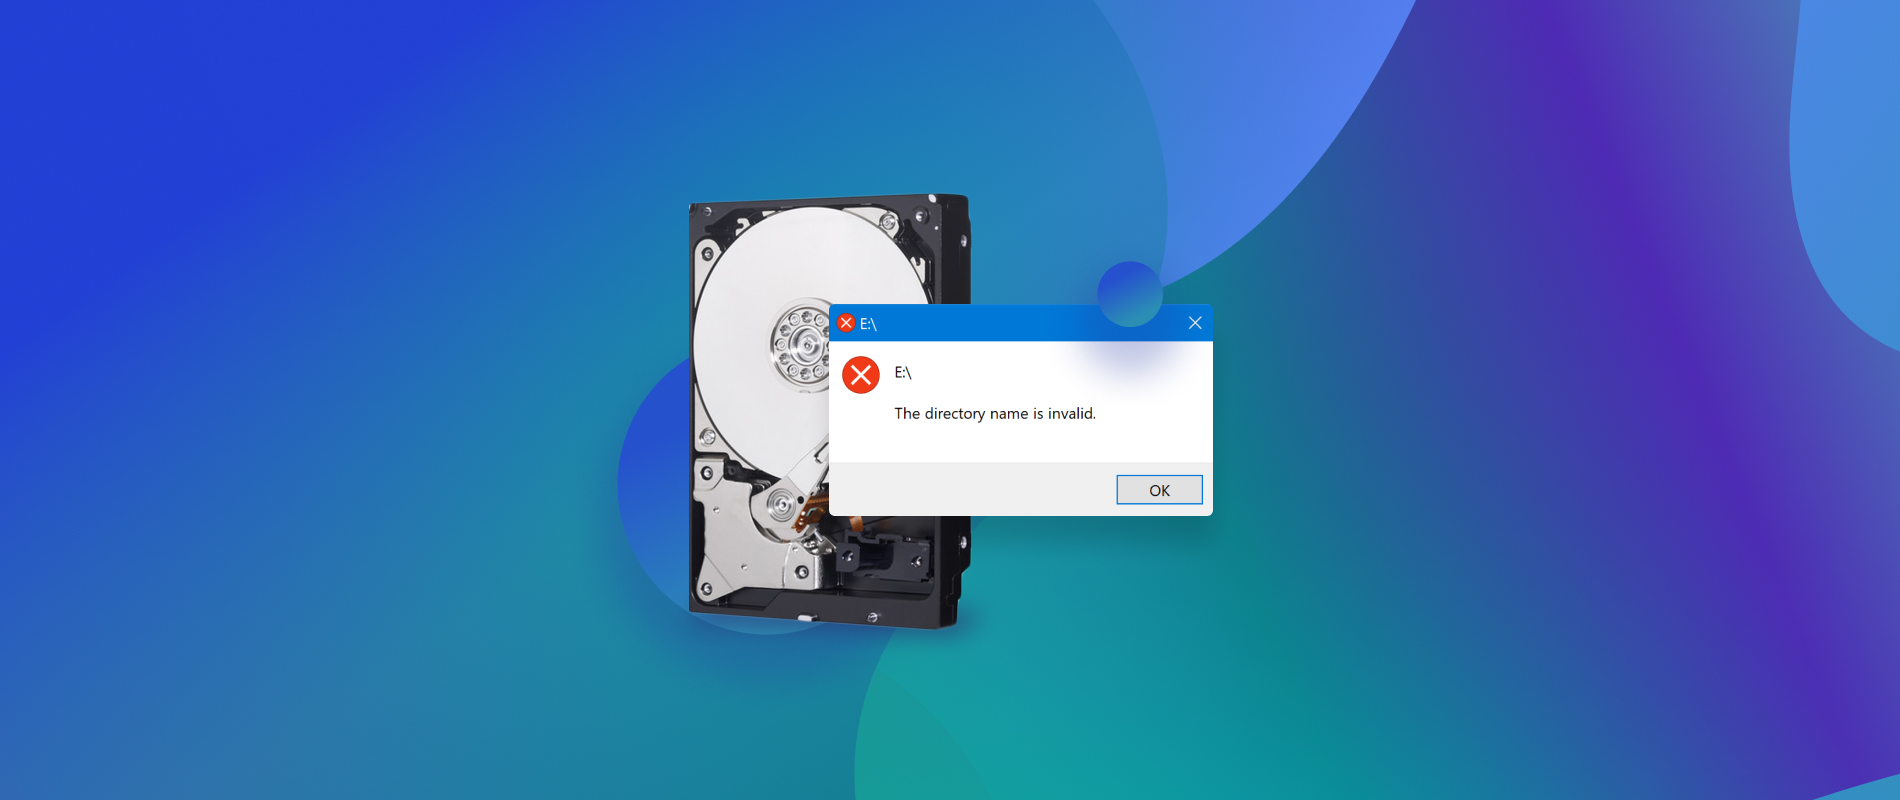 Schedule Visible age How To Easily Fix a Corrupted Hard Drive On Windows 10 (2022)